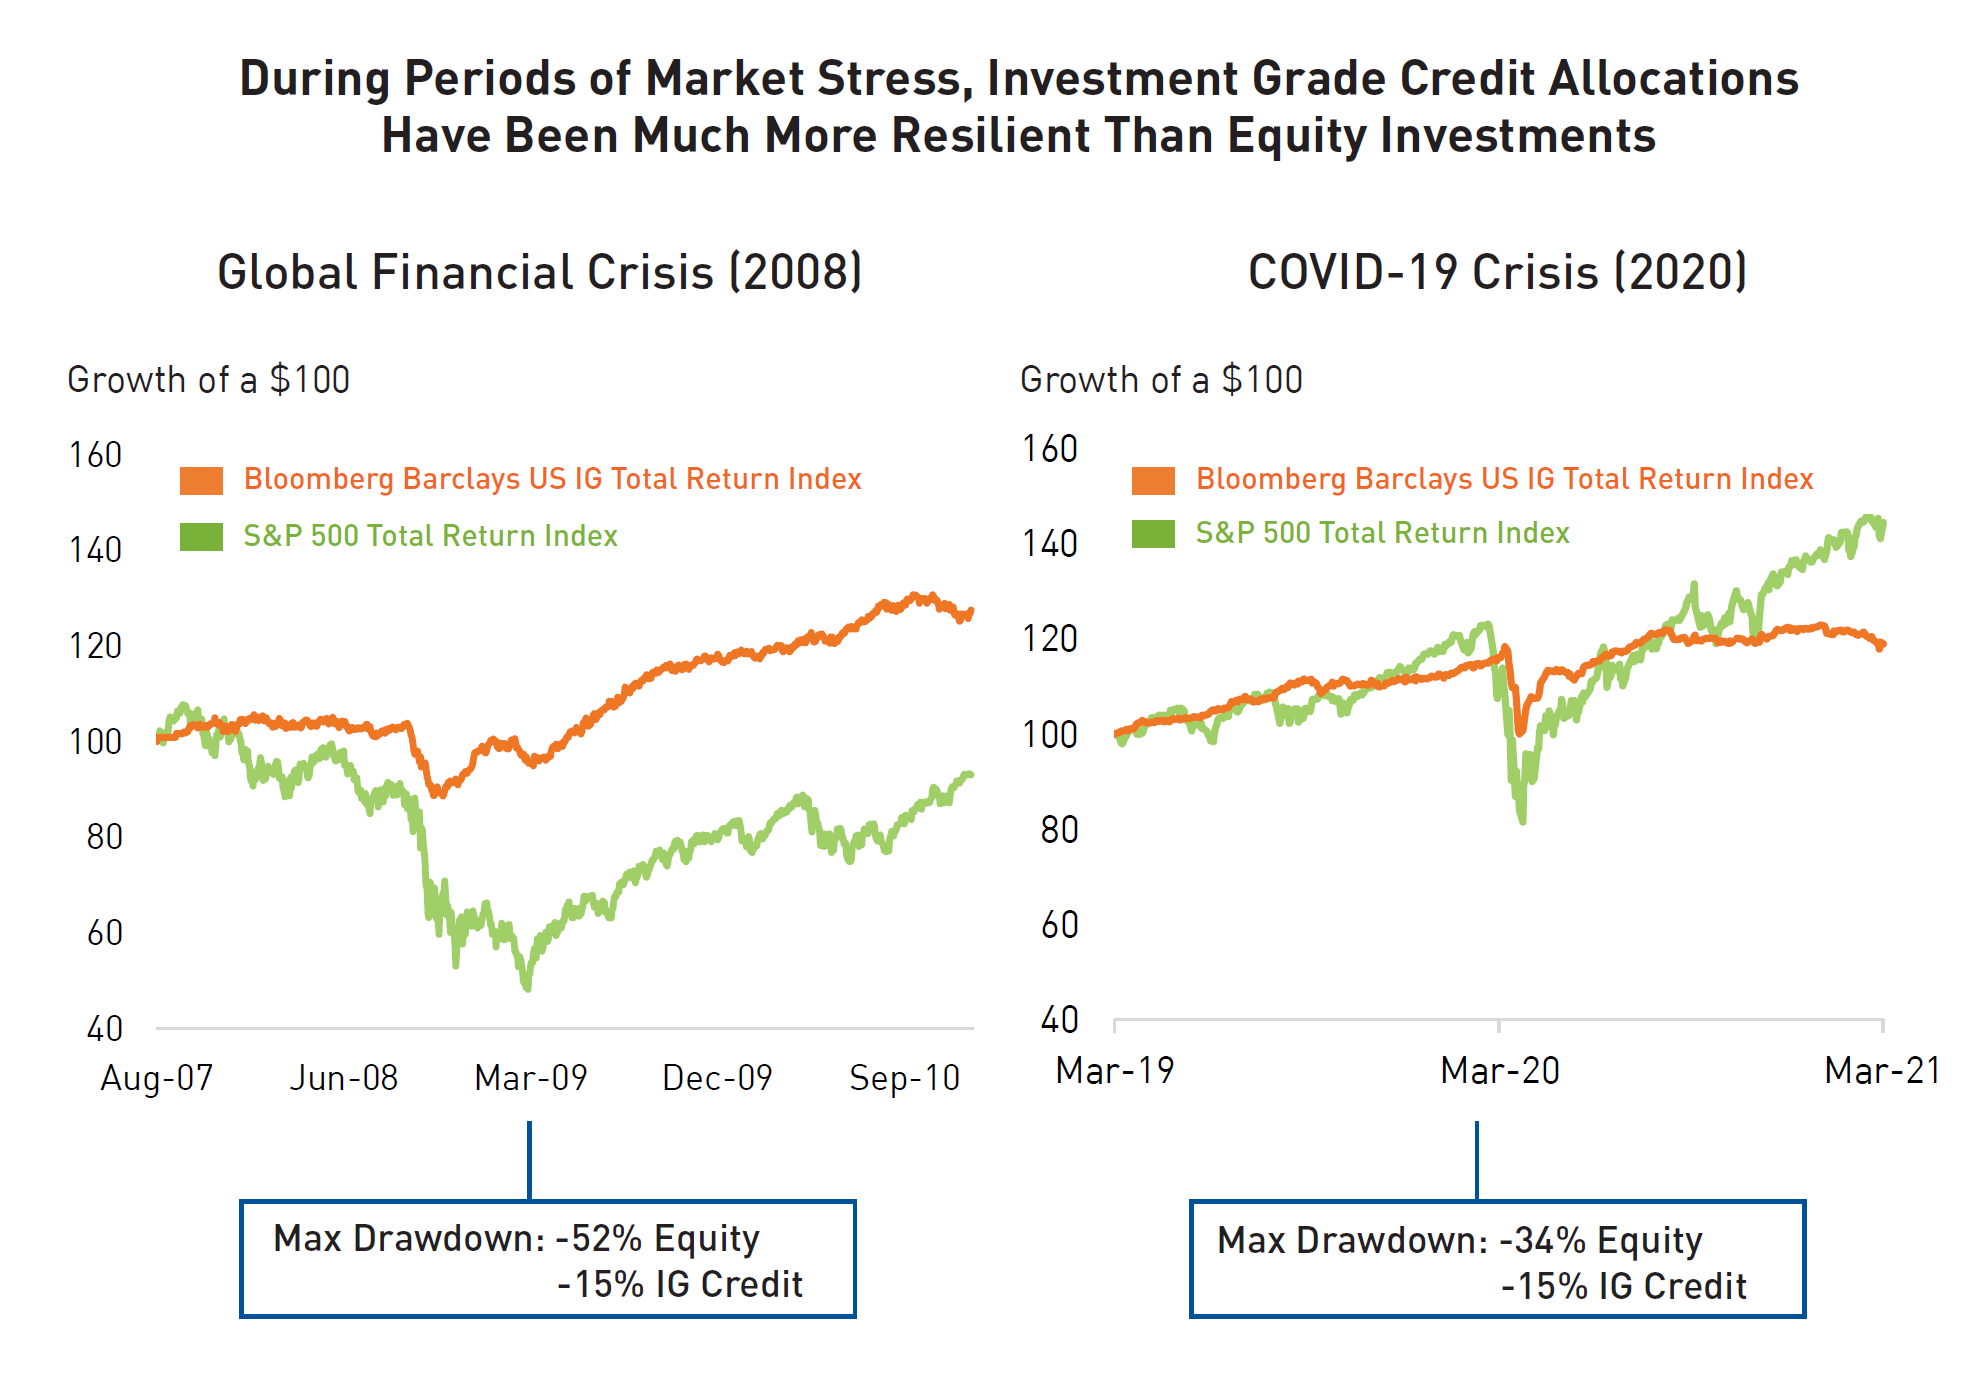 During Periods of Market Stress, Investment Grade Credit Allocations Have Been Much More Resilient Than Equity Investments